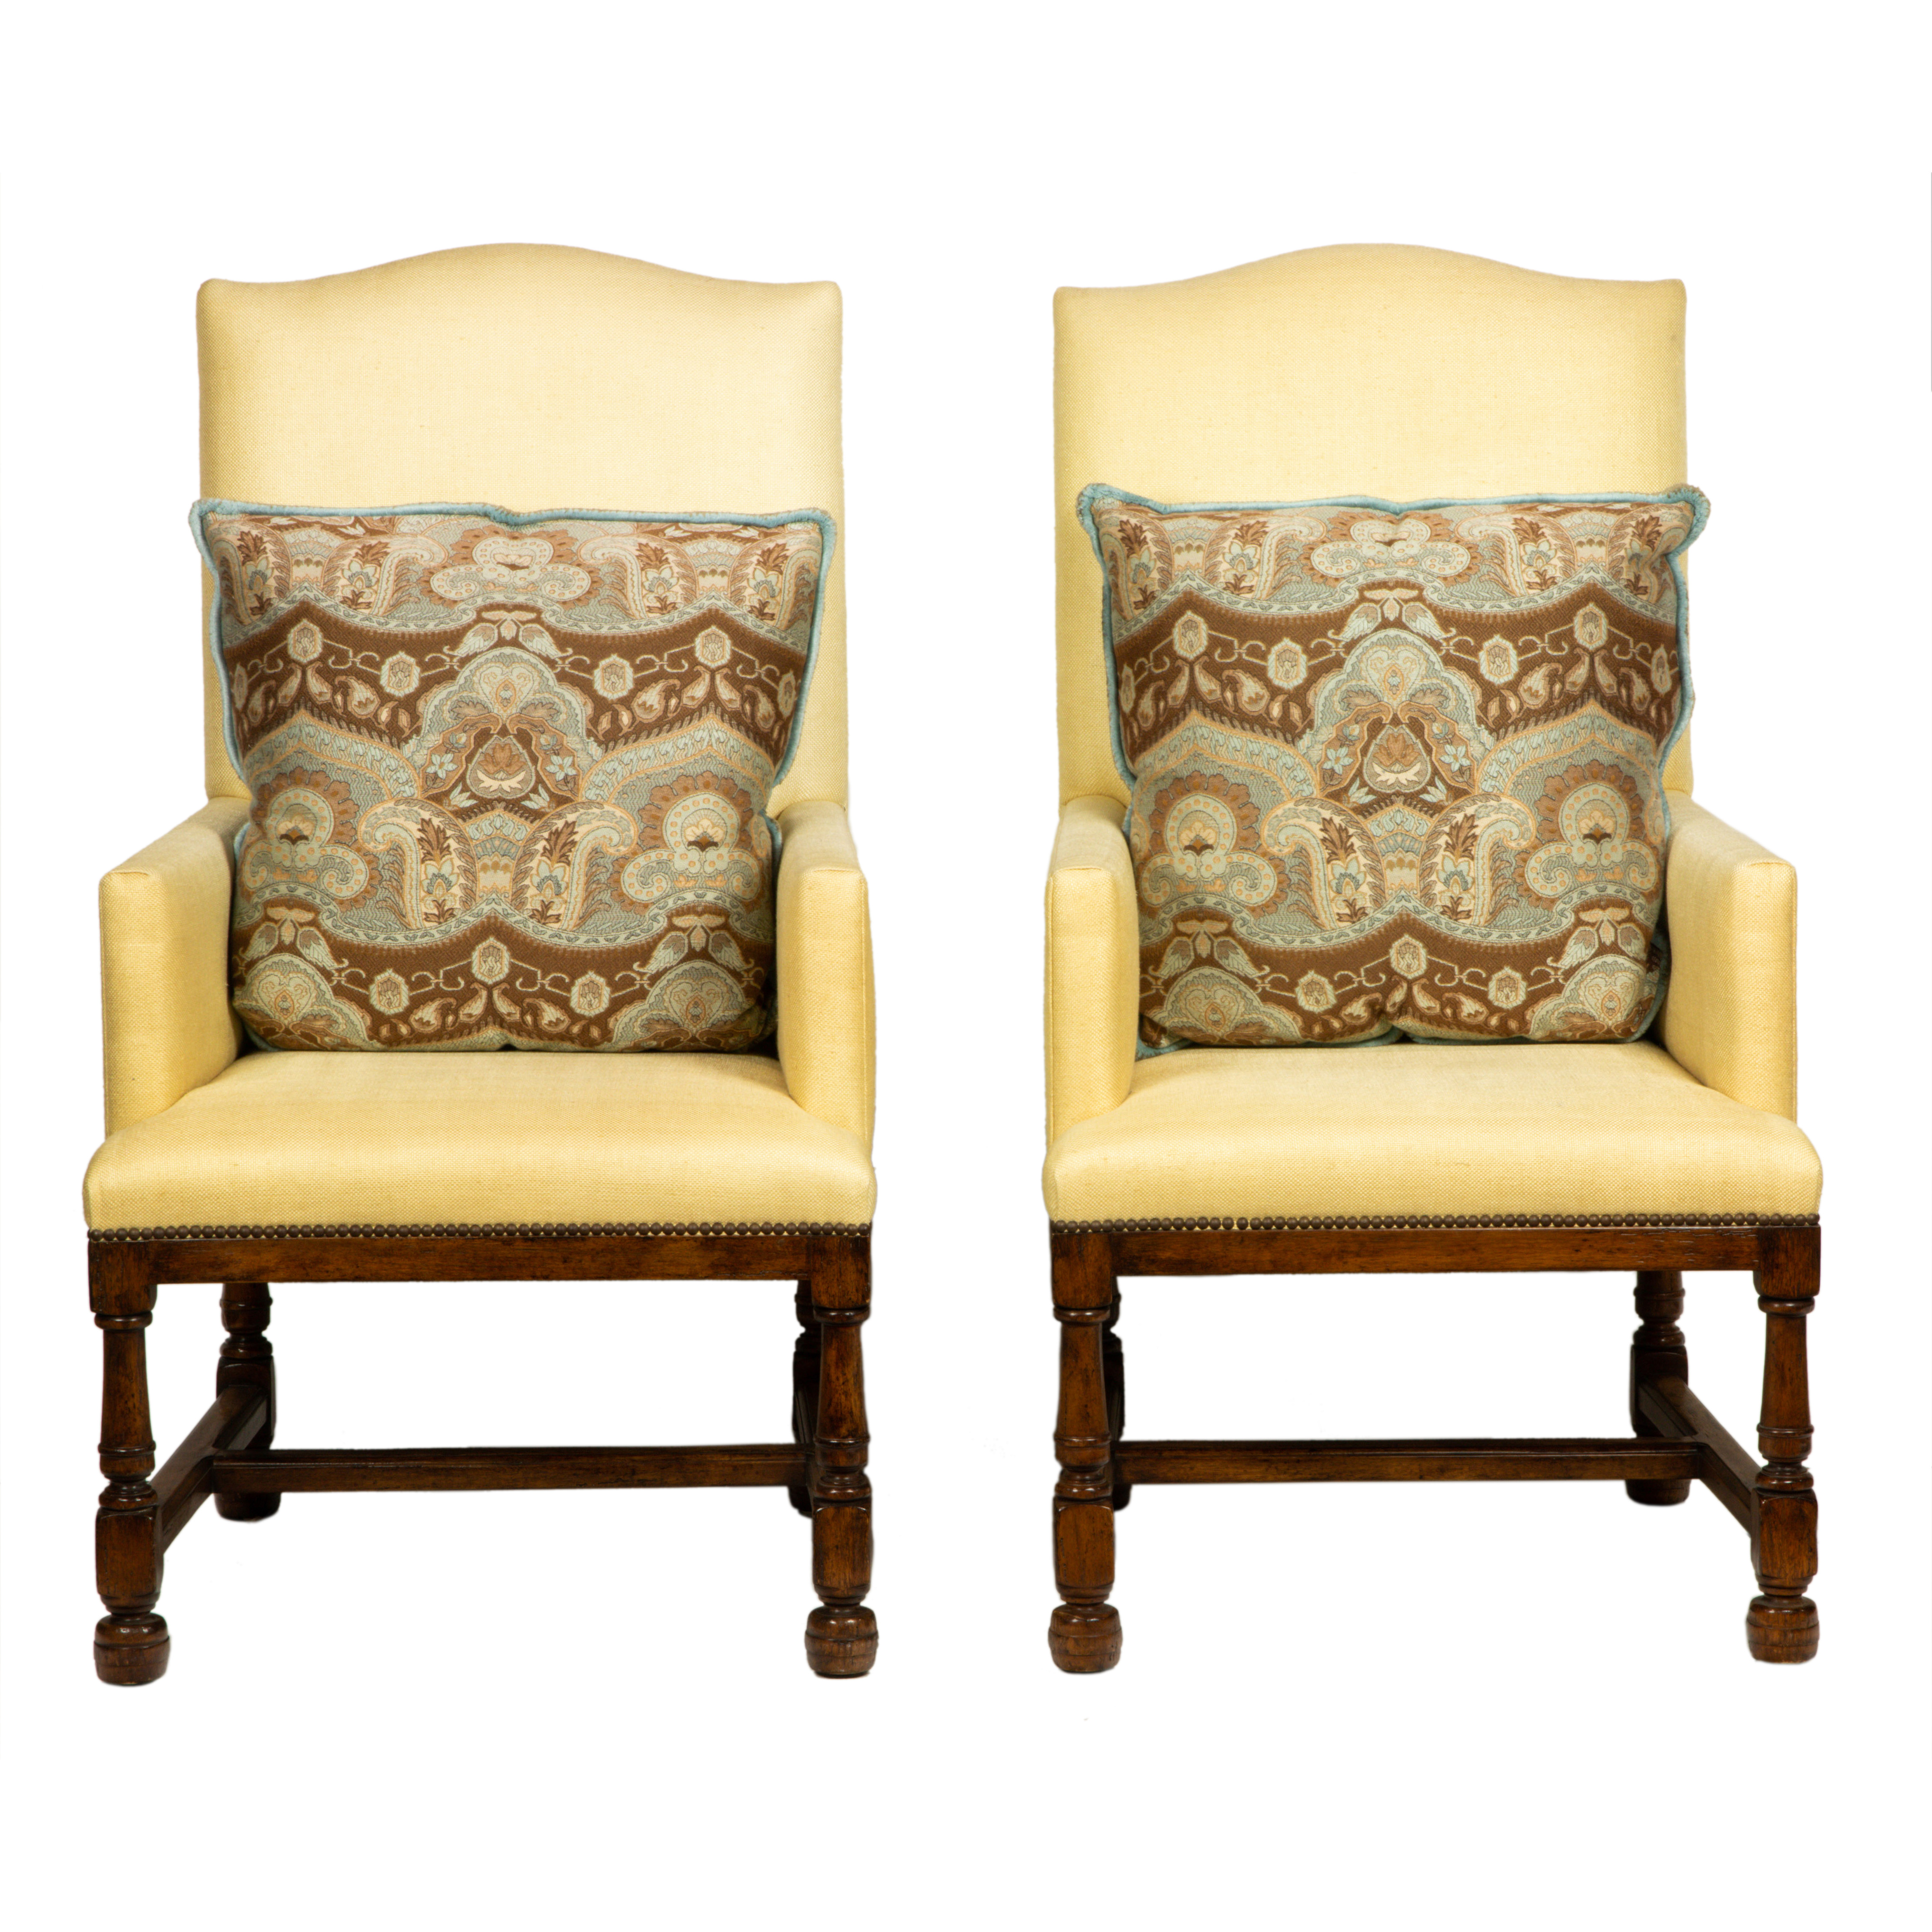 A PAIR OF CLASSICAL STYLE LOUNGE